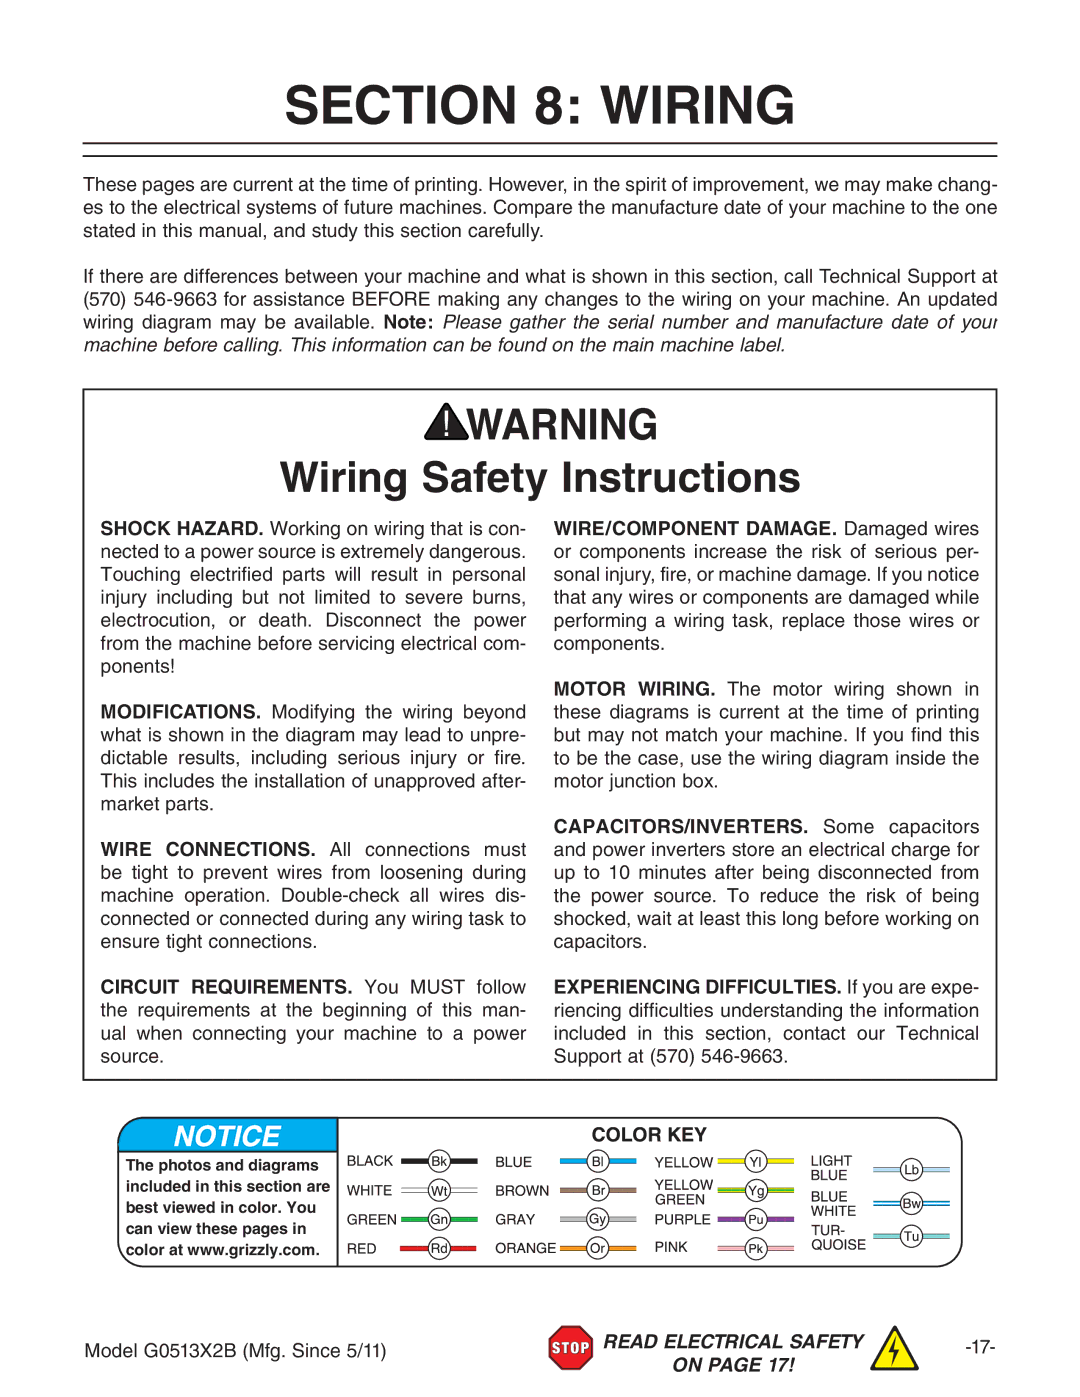 Grizzly G0513X2B manual Wiring Safety Instructions 